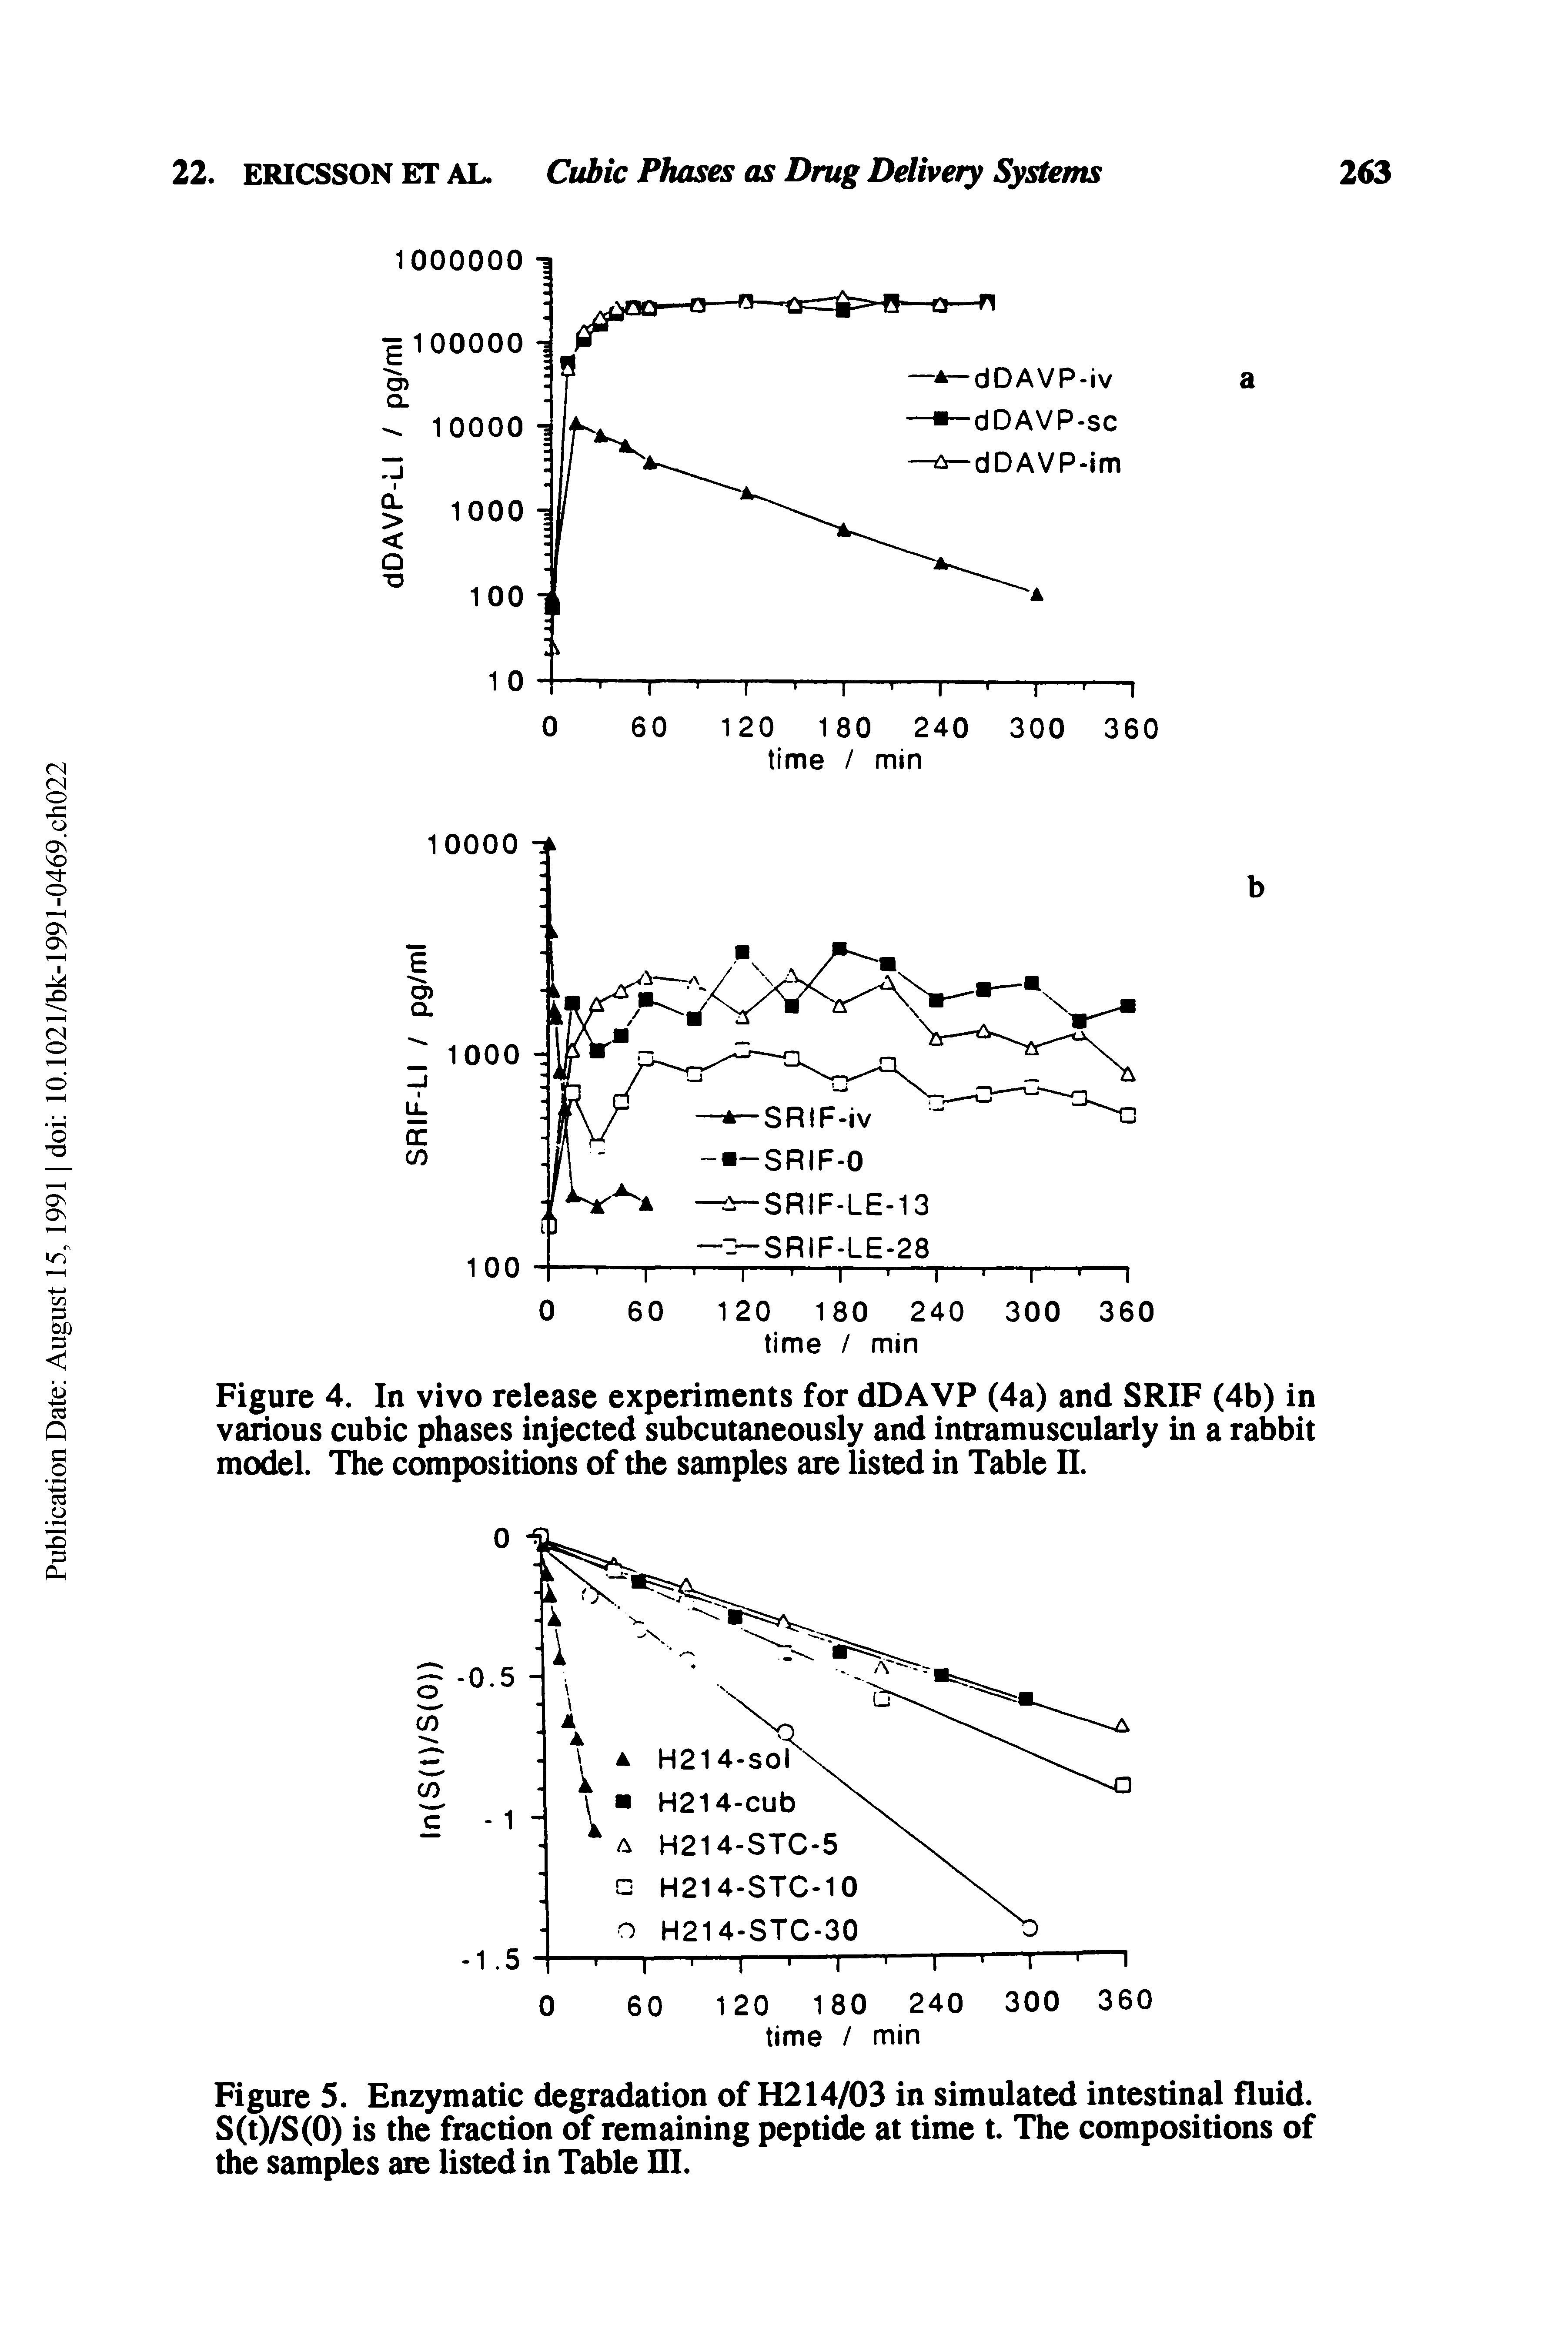 Figure 5. Enzymatic degradation of H214/03 in simulated intestinal fluid. S(t)/S(0) is the fraction of remaining peptide at time t. The compositions of the samples are listed in Table HI.